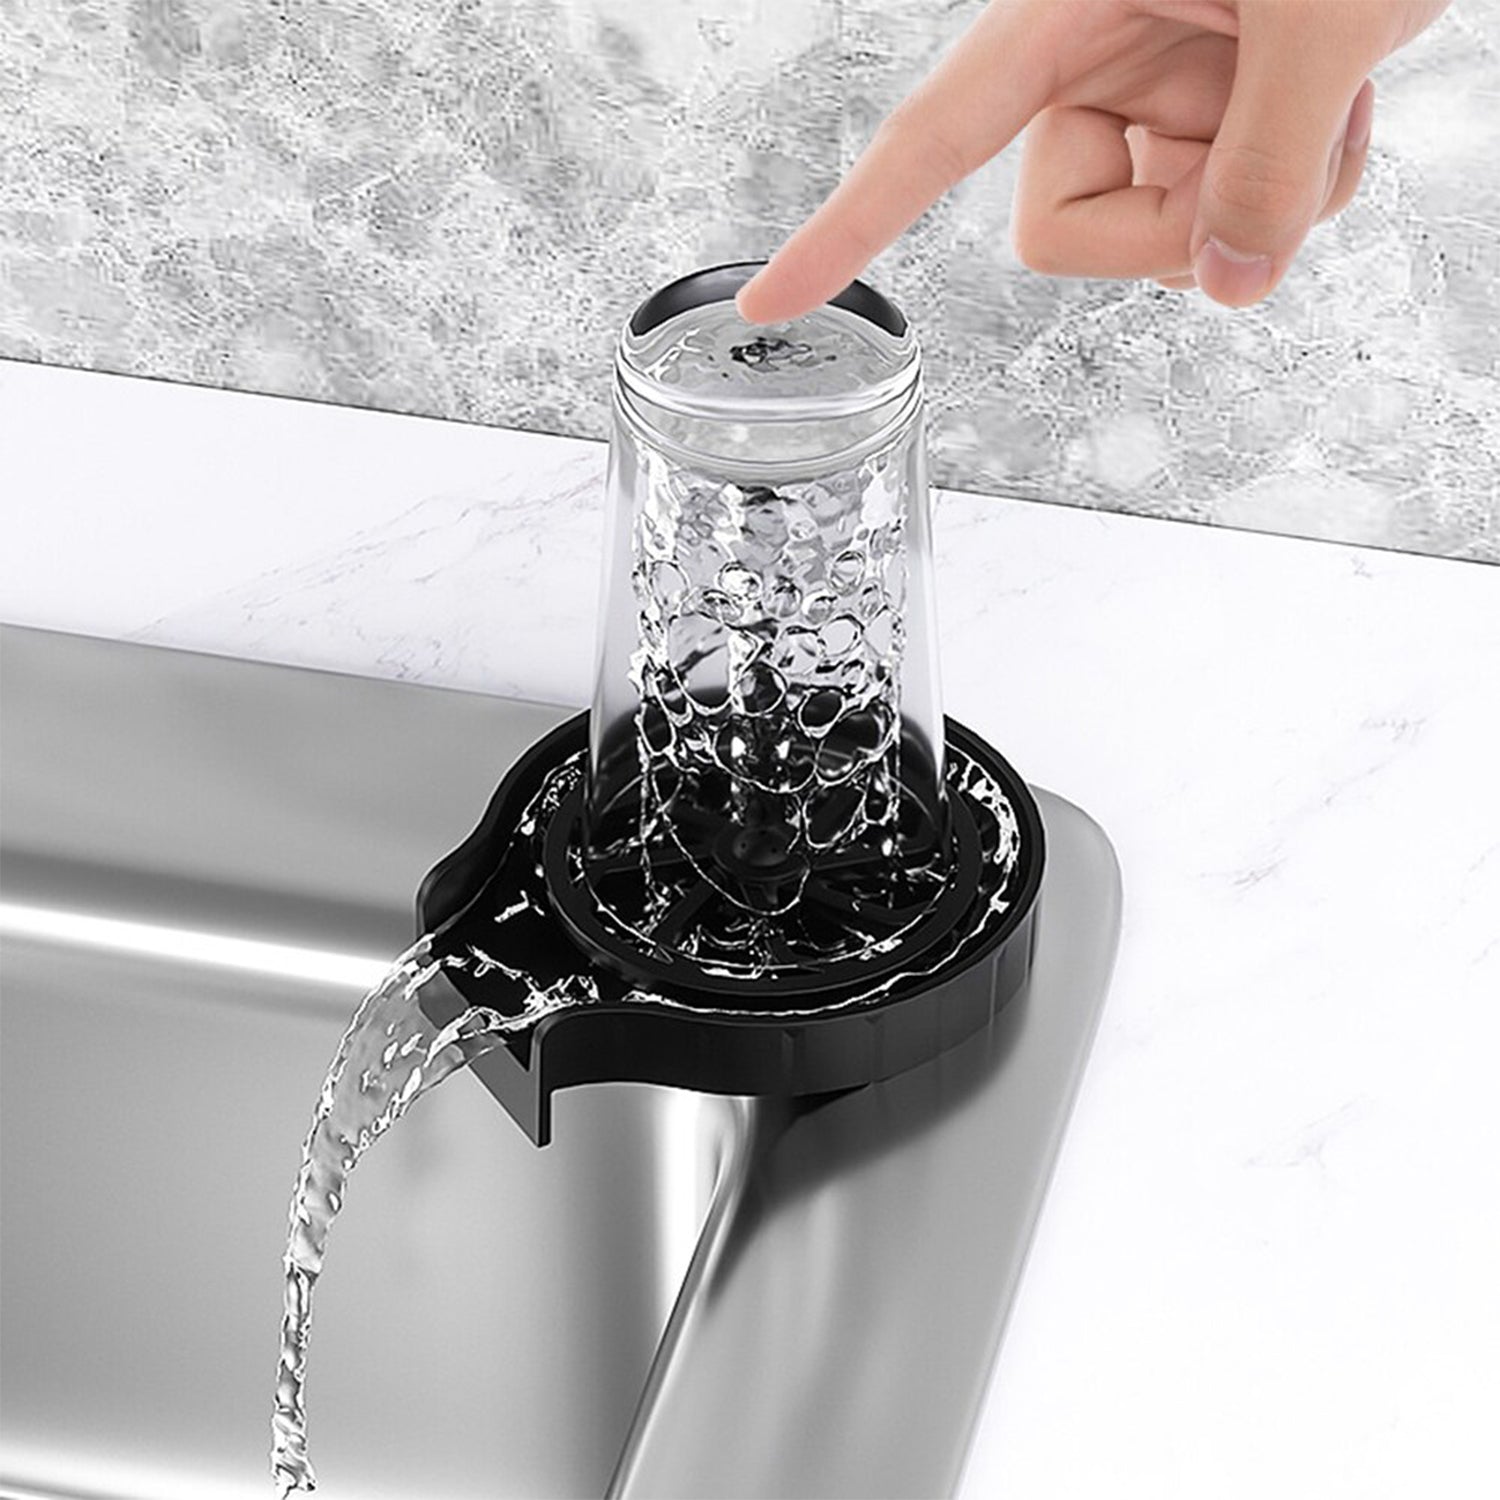 2232L Automatic Cup Washer or Glass Rinser for Kitchen Sink, Black Kitchen Sink Cleaning Spray Cup Washer, Bar Glass Washer. (loose)